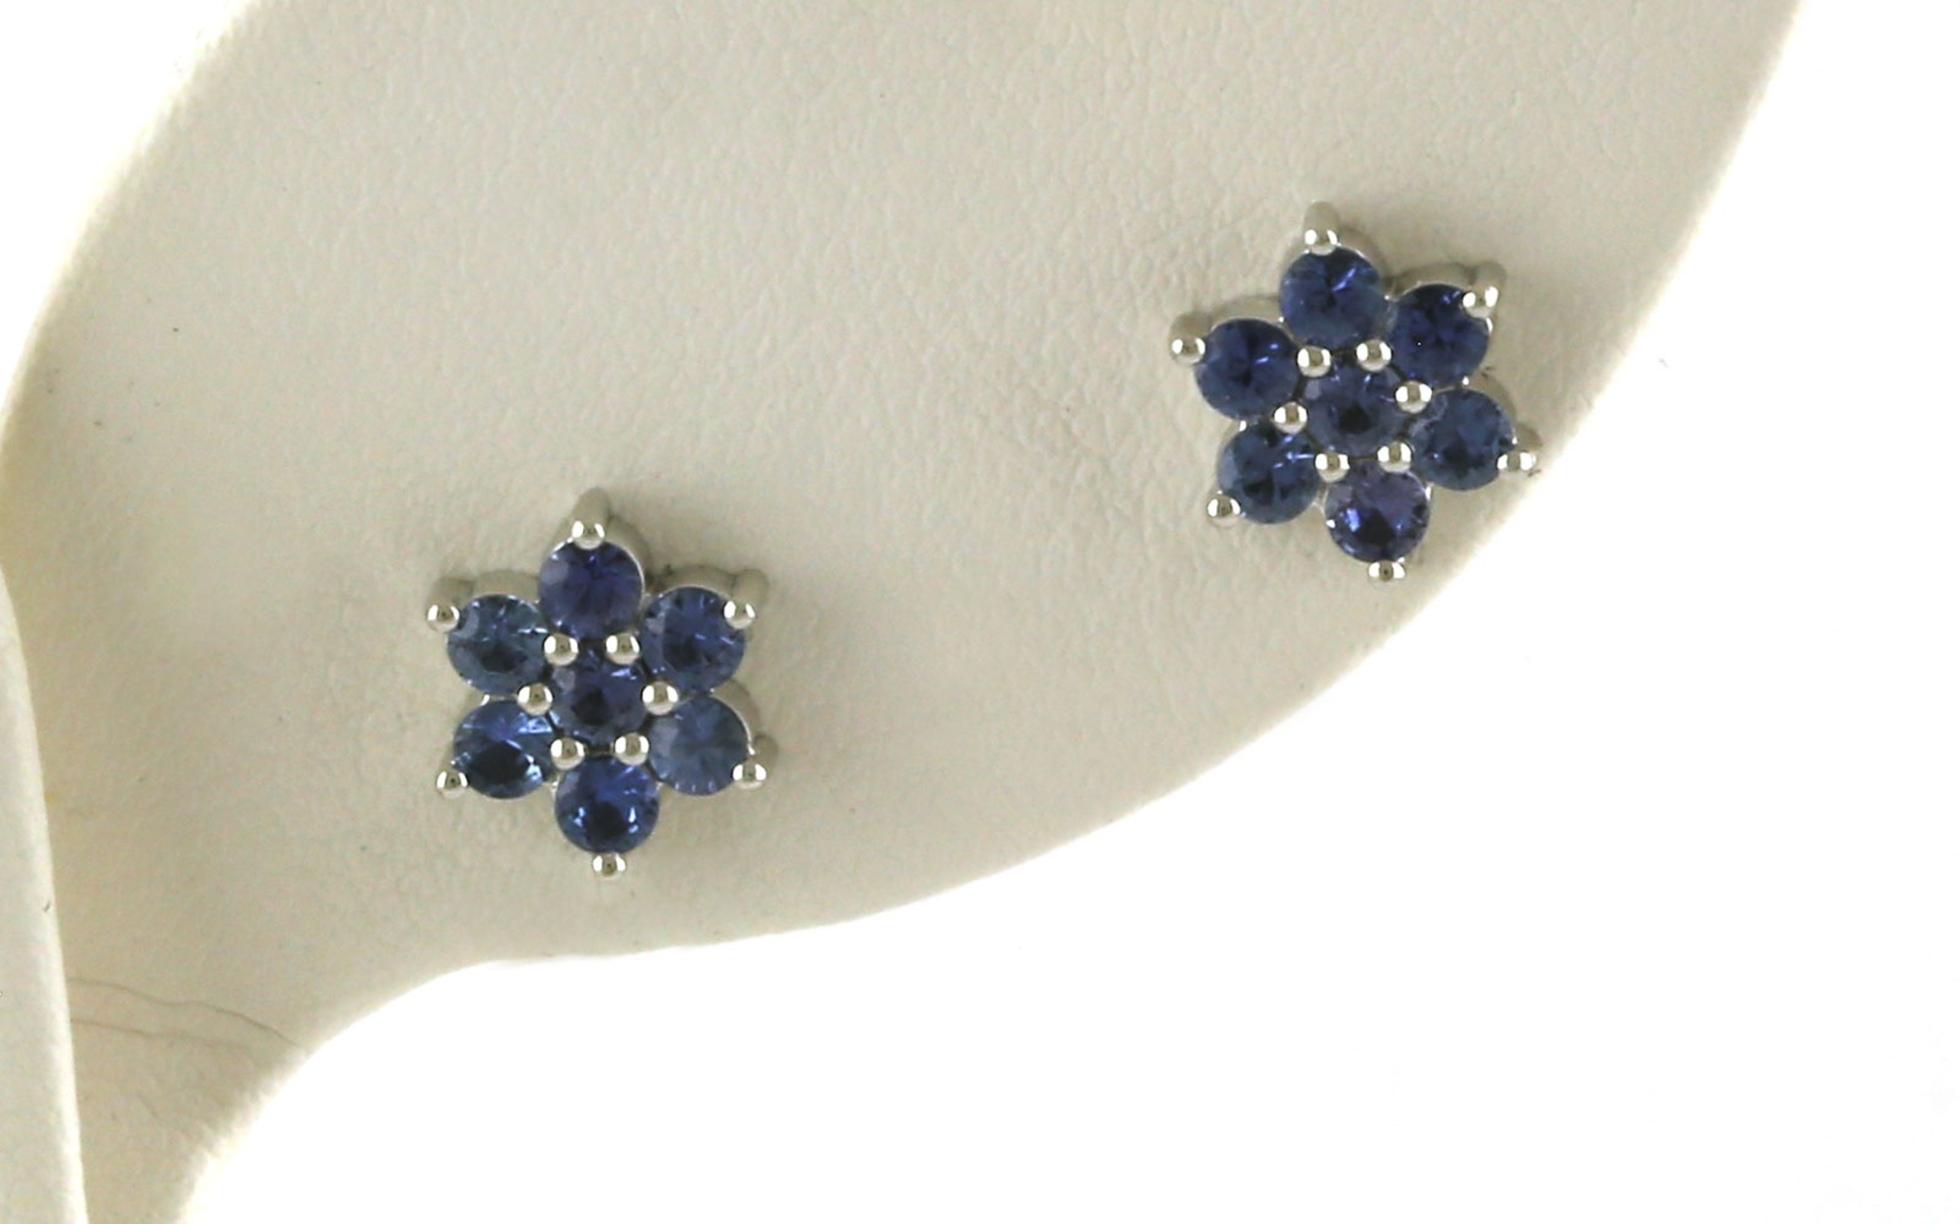 Star Cluster Montana Yogo Sapphire Earrings in White Gold (0.78cts TWT)